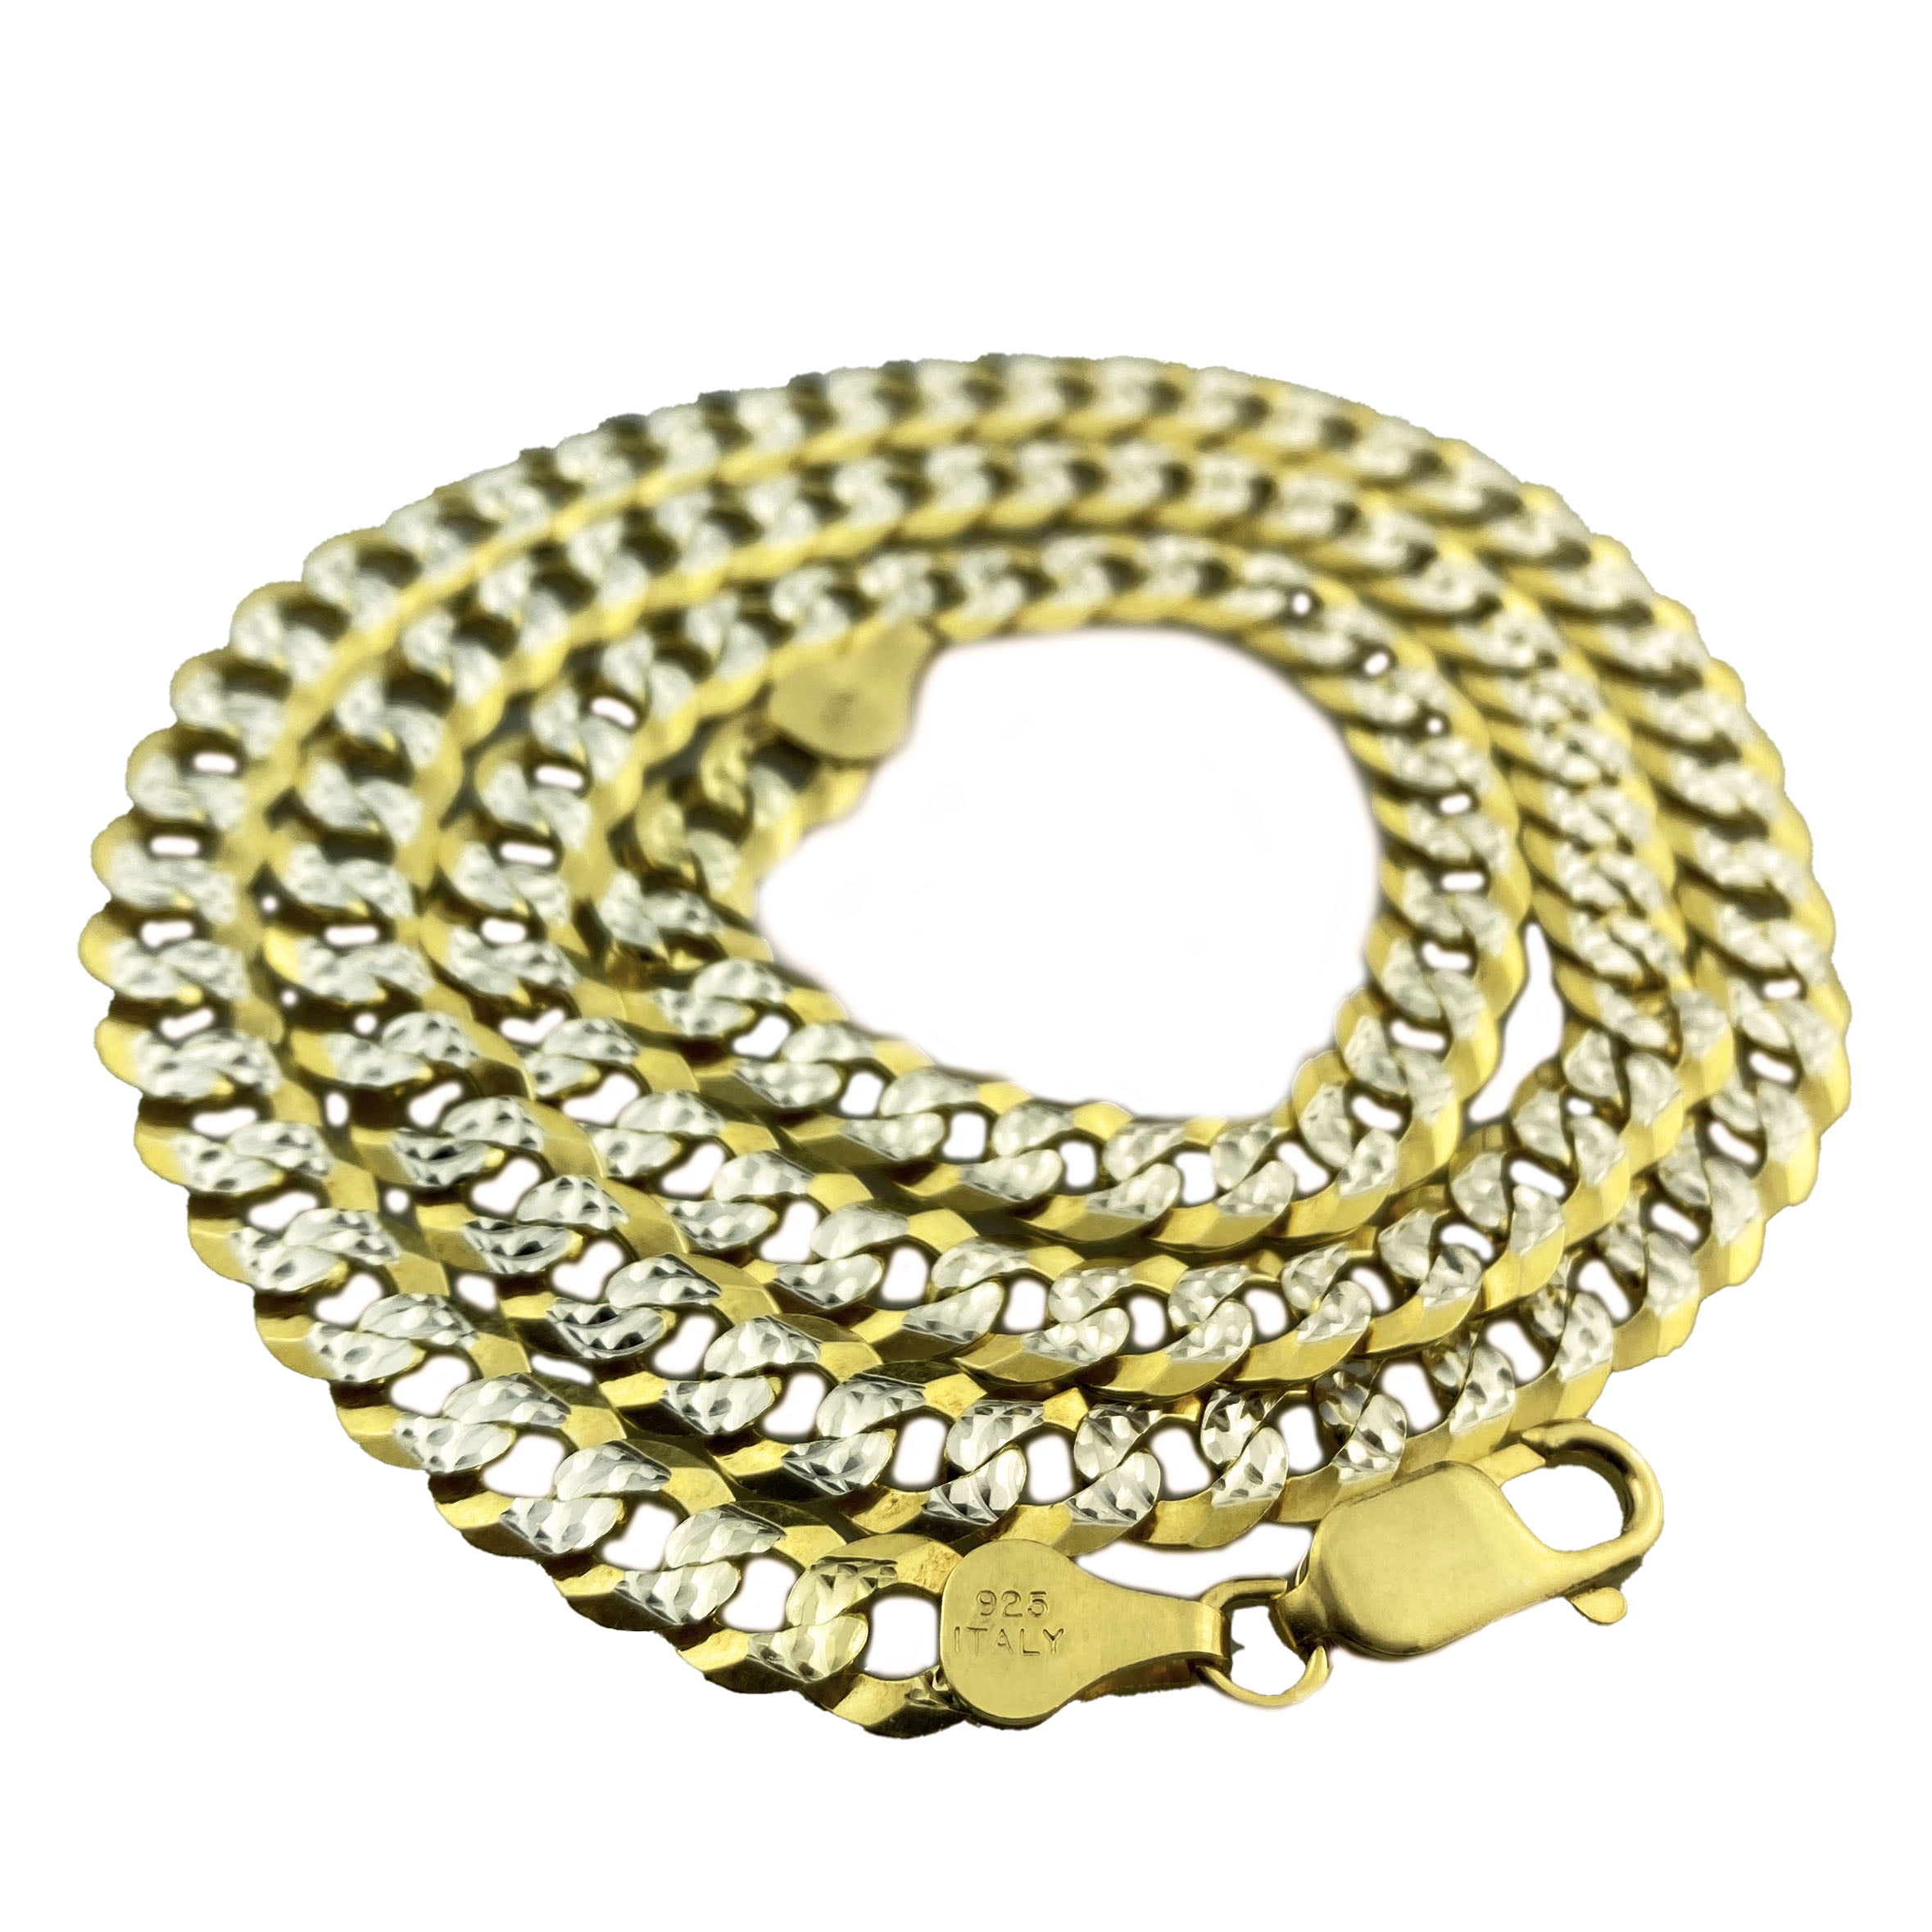 50 75 100cm 40 45 95 25 30 35 80 70 15 1mm thick 14k gold plated on solid sterling silver 925 Italian diamond cut BOX link style chain necklace bracelet anklet 55 20 90 60 65 85